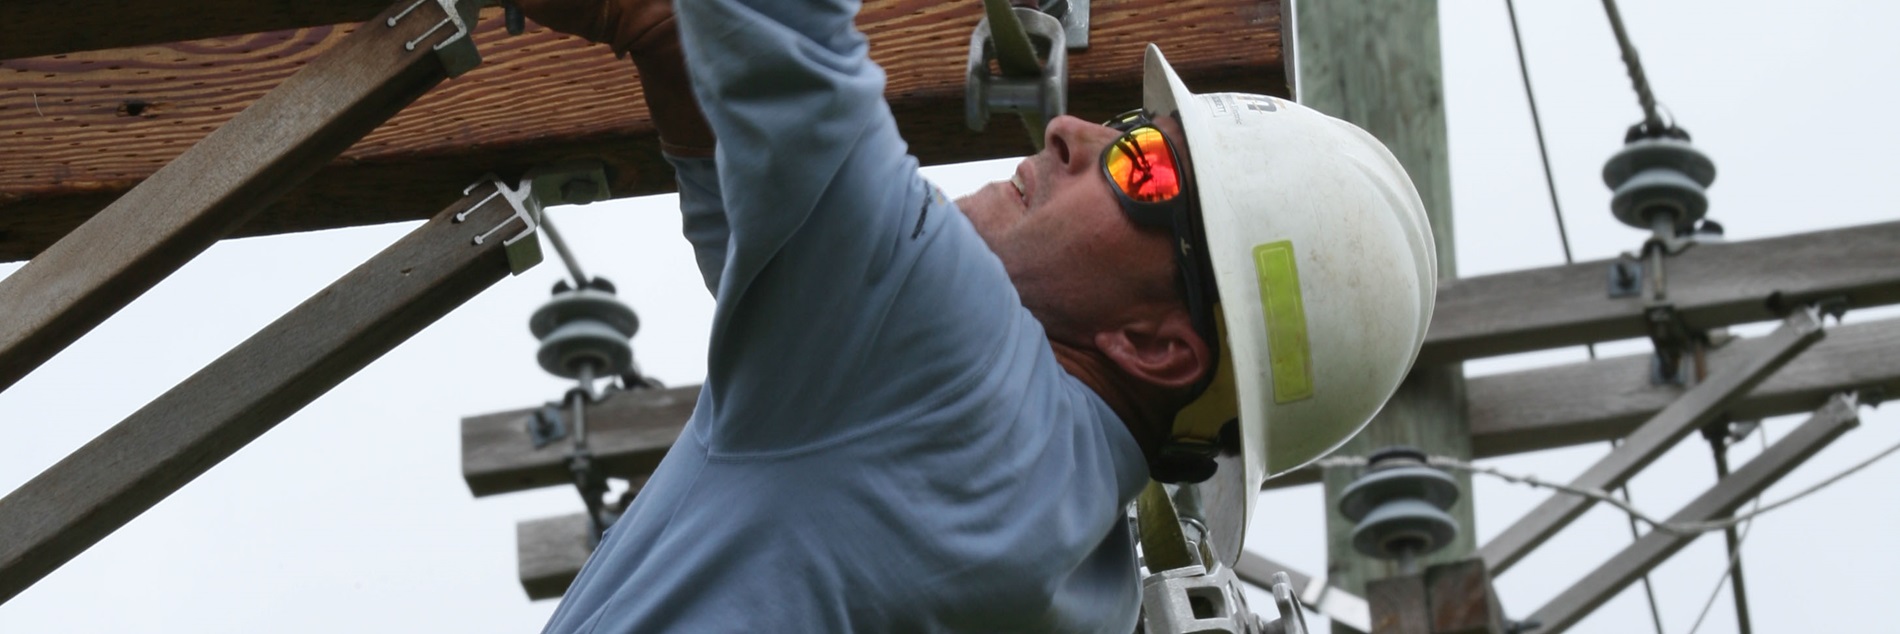 Electrical Worker with MCR Safety glasses